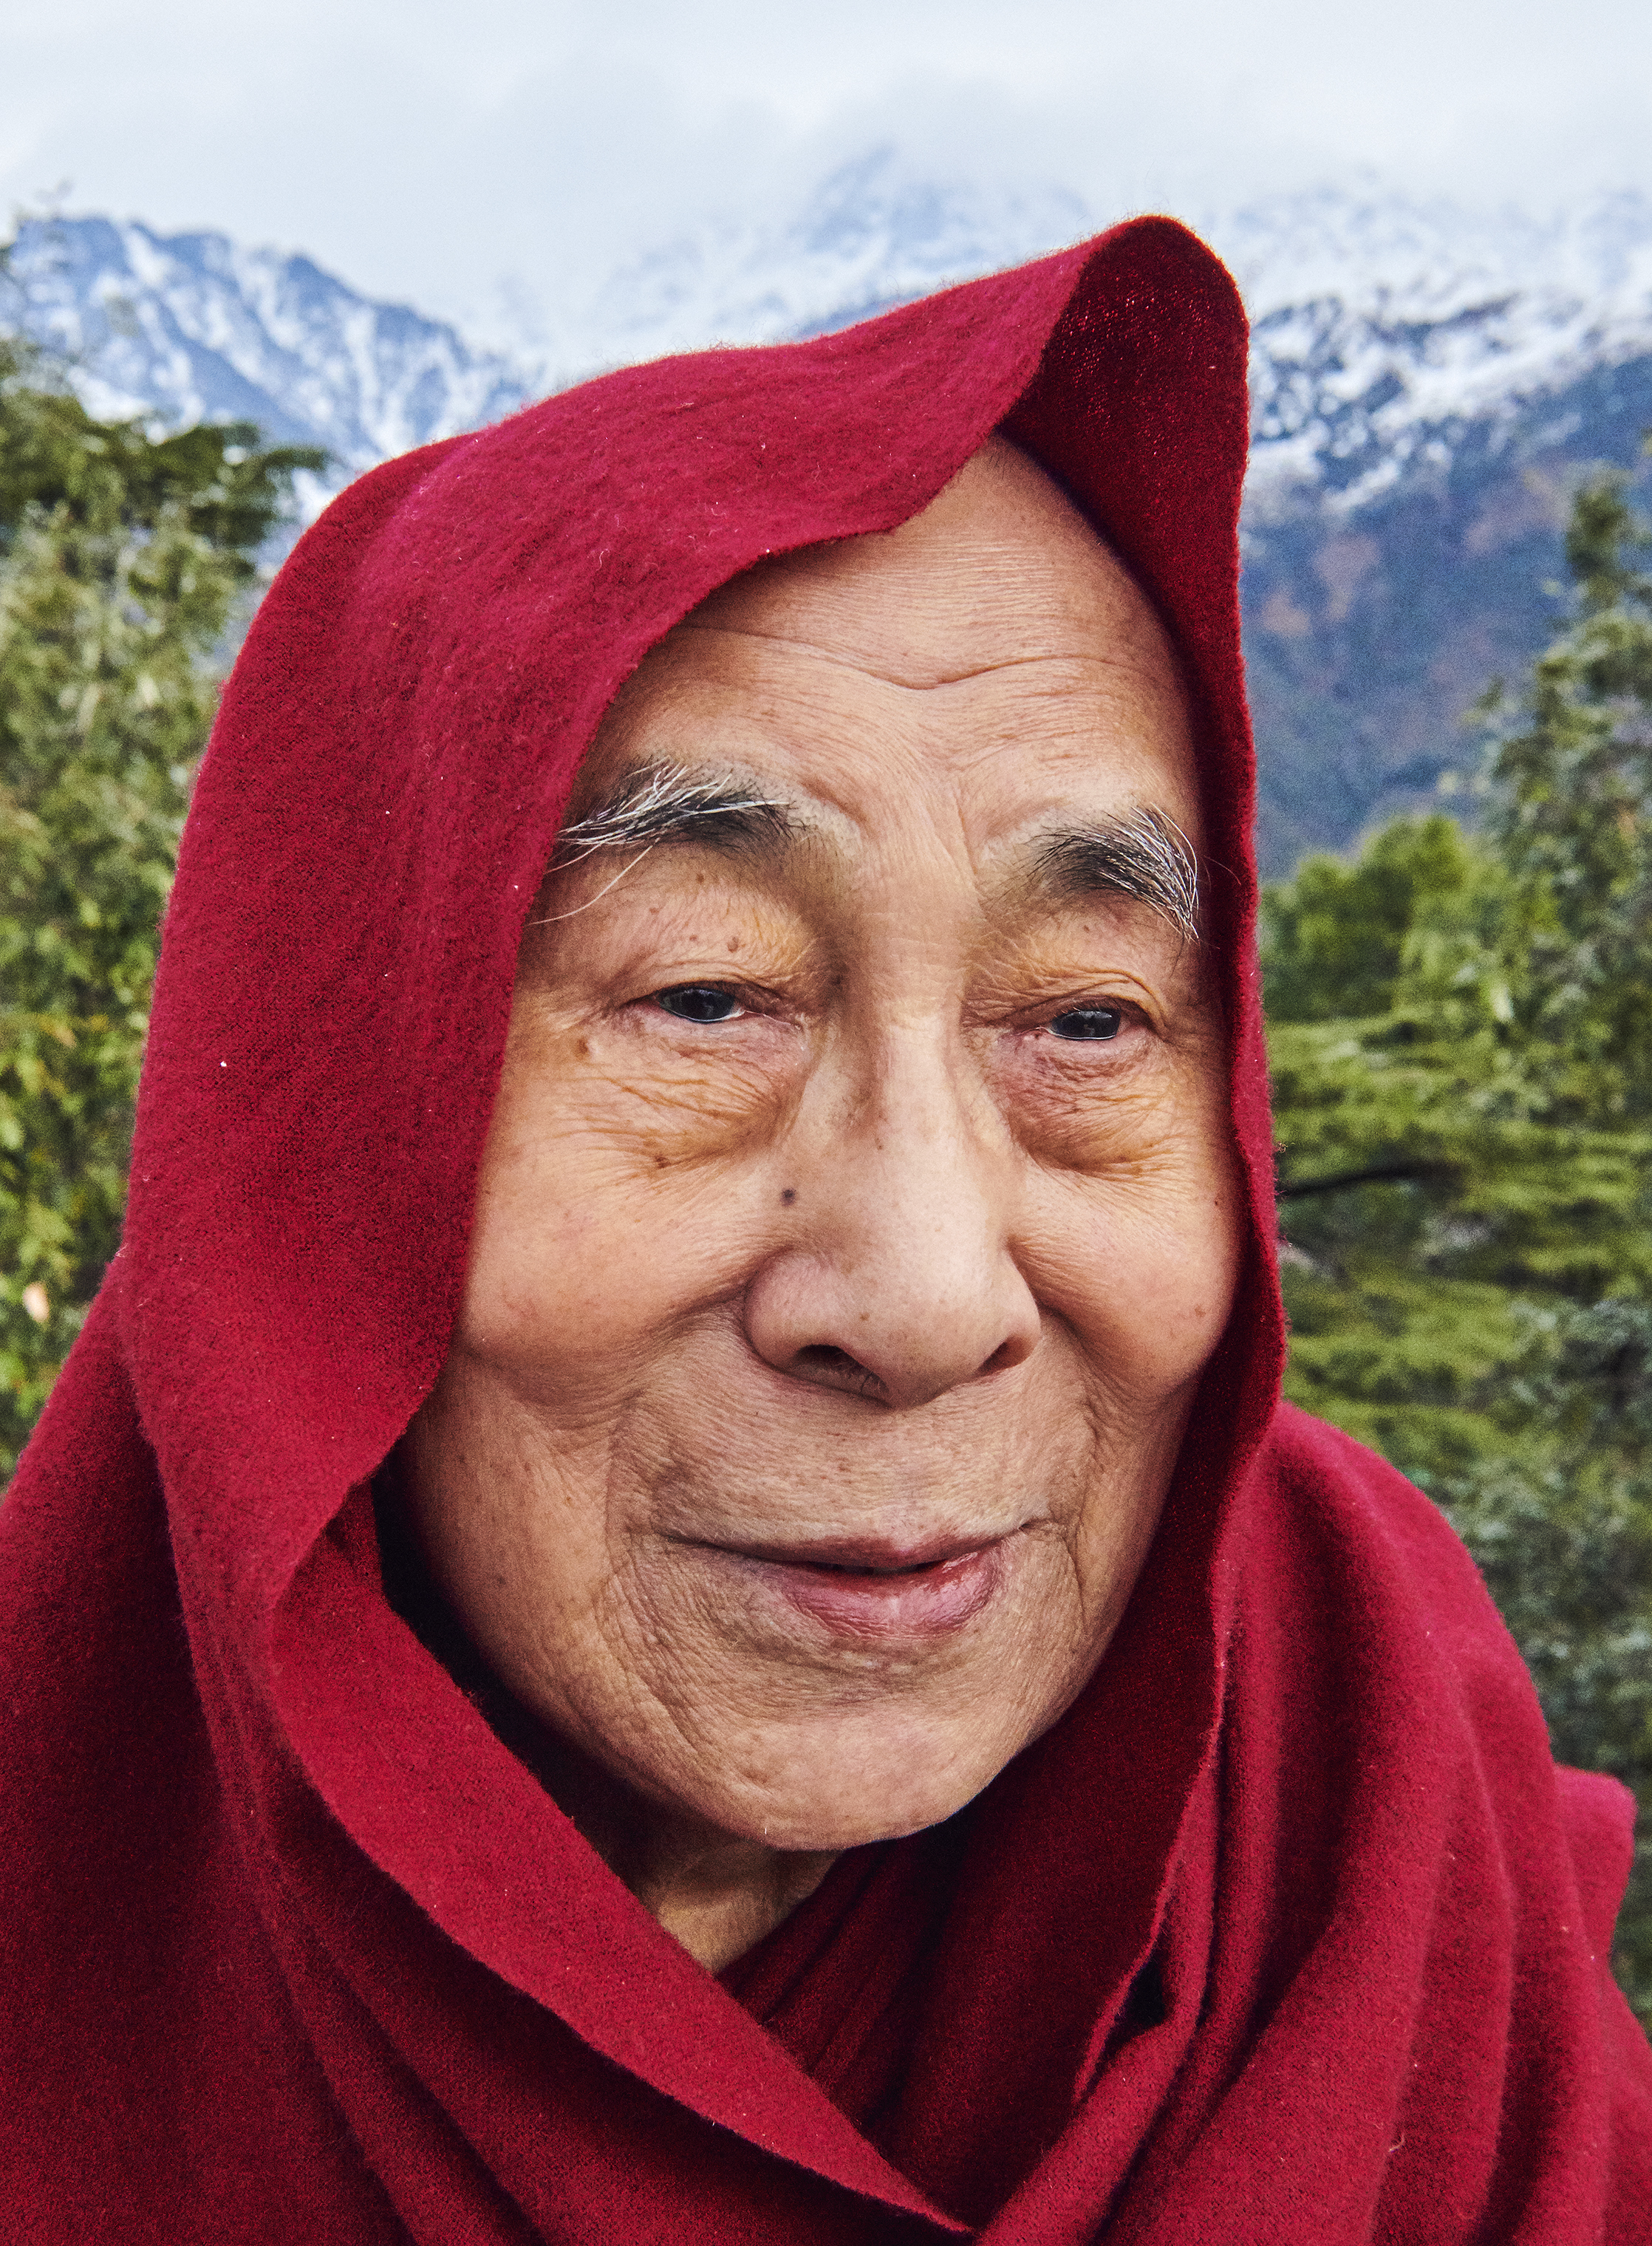 At 83, the Buddhist leader reflects on a life spent away from his native Tibet. (Ruven Afanador for TIME)